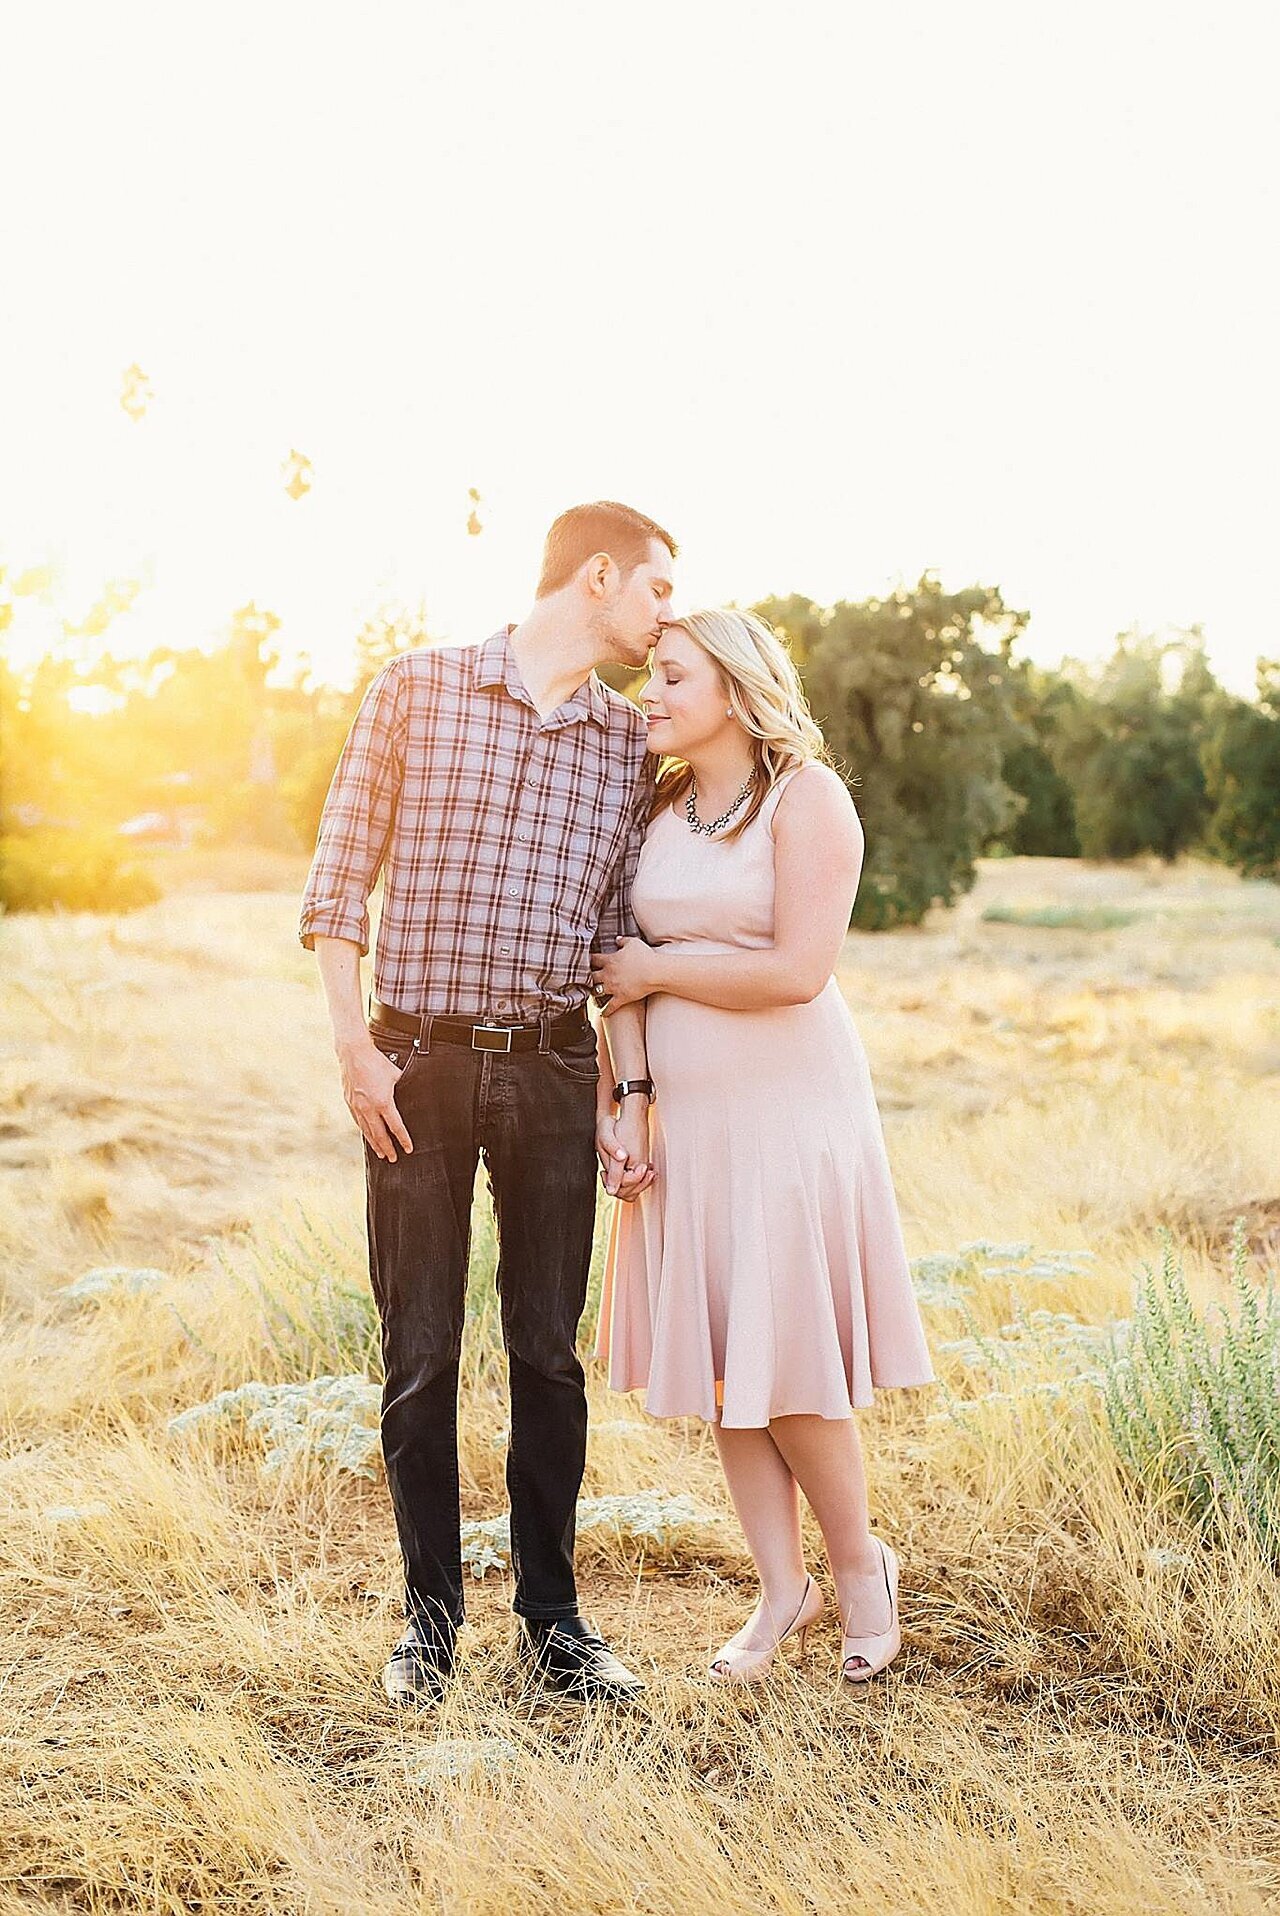 MIchelle Peterson Photography Redlands California wedding and portrait photographer_1216